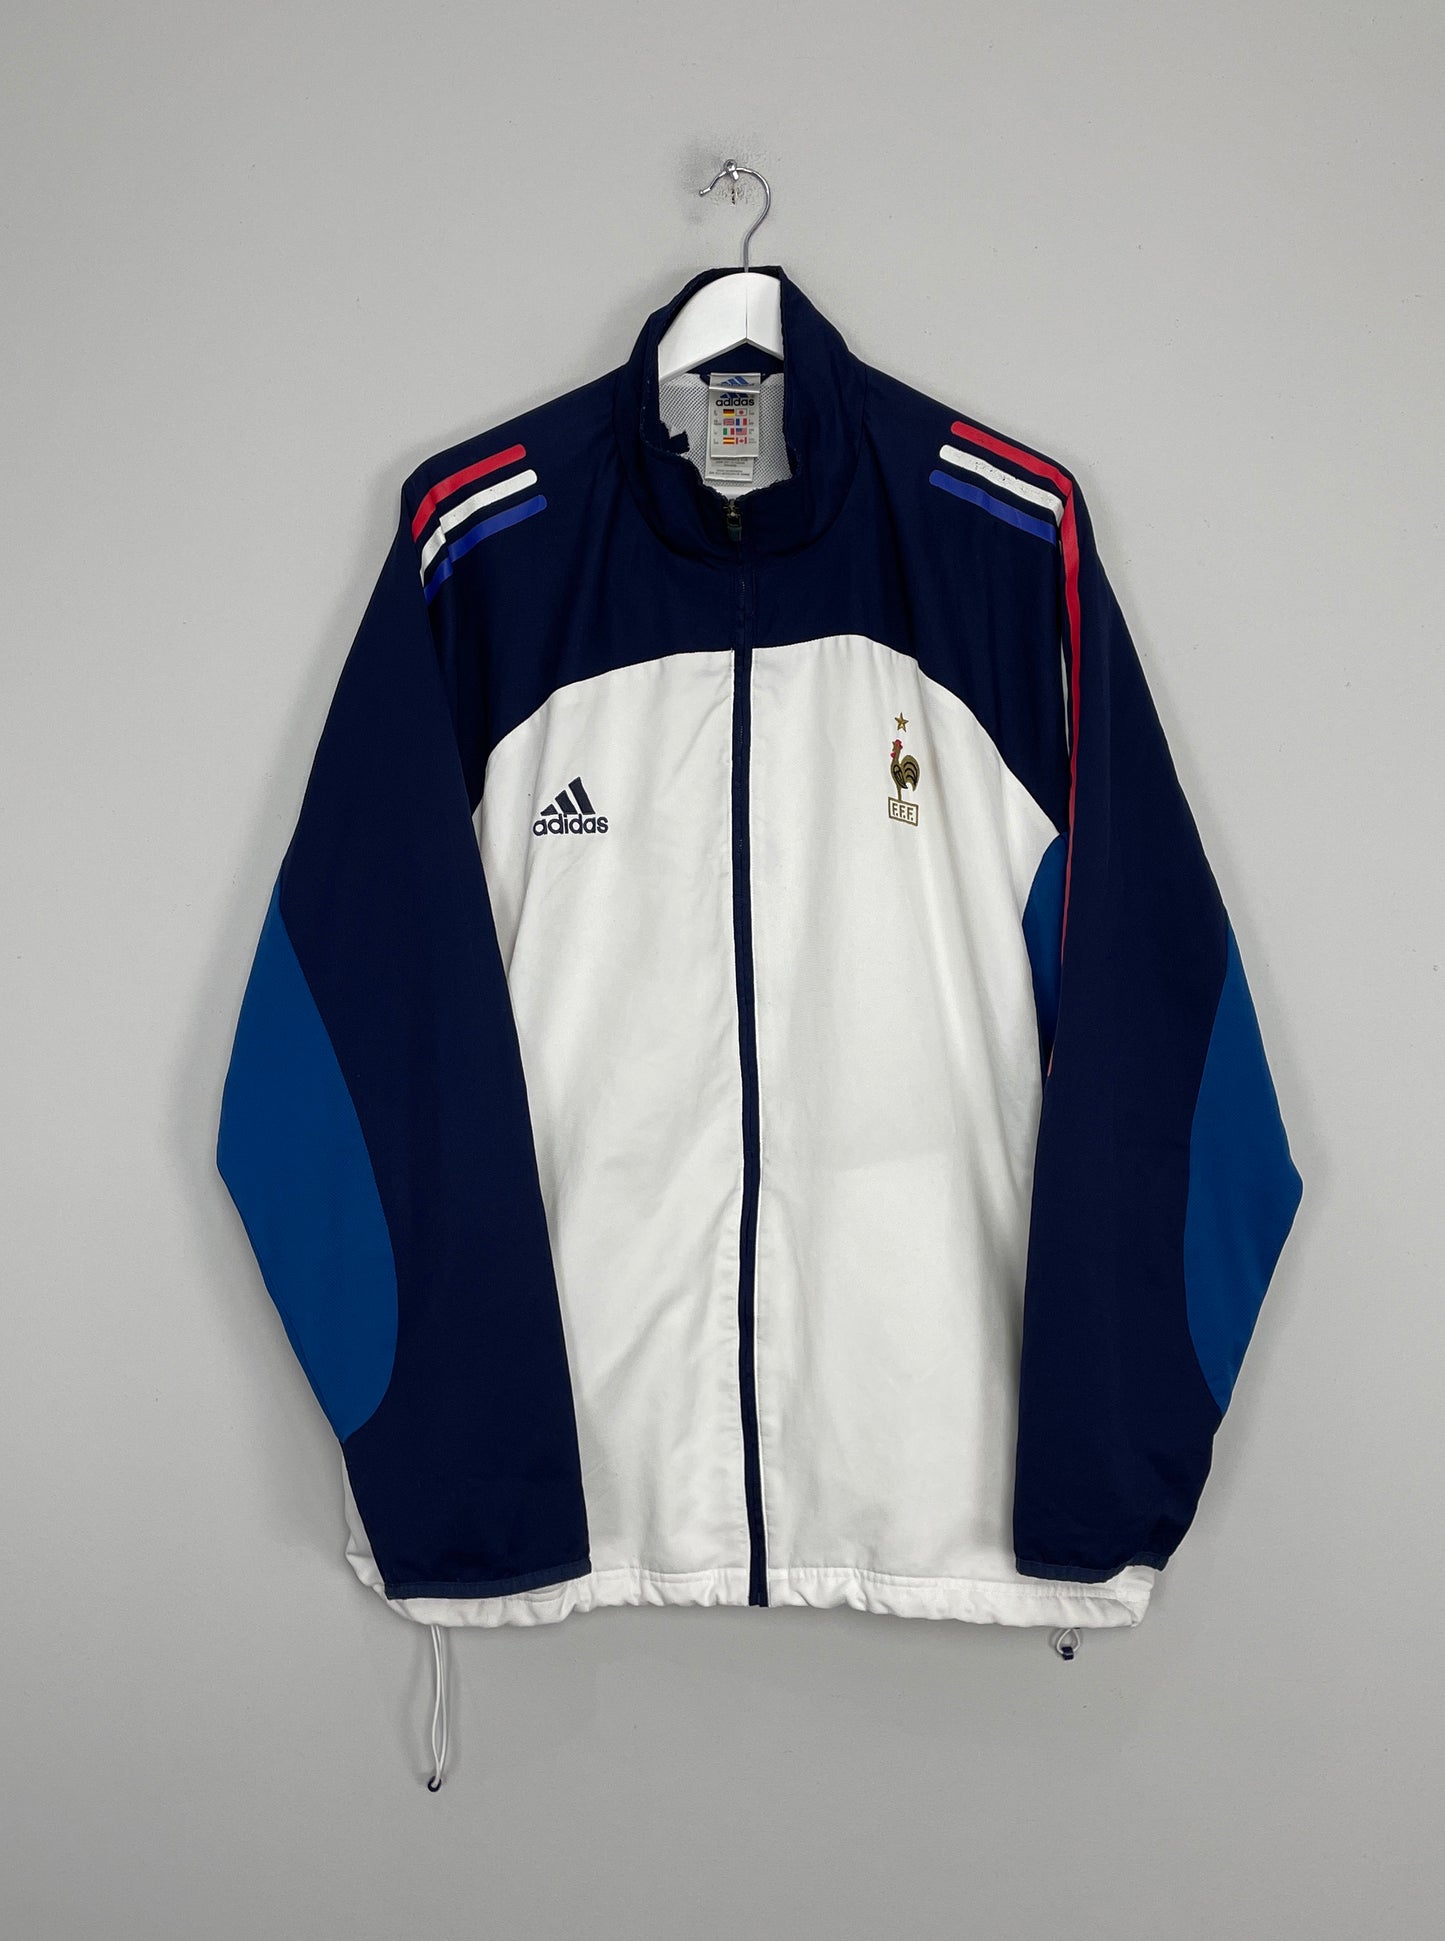 Image of the France jacket from the 2002/04 season